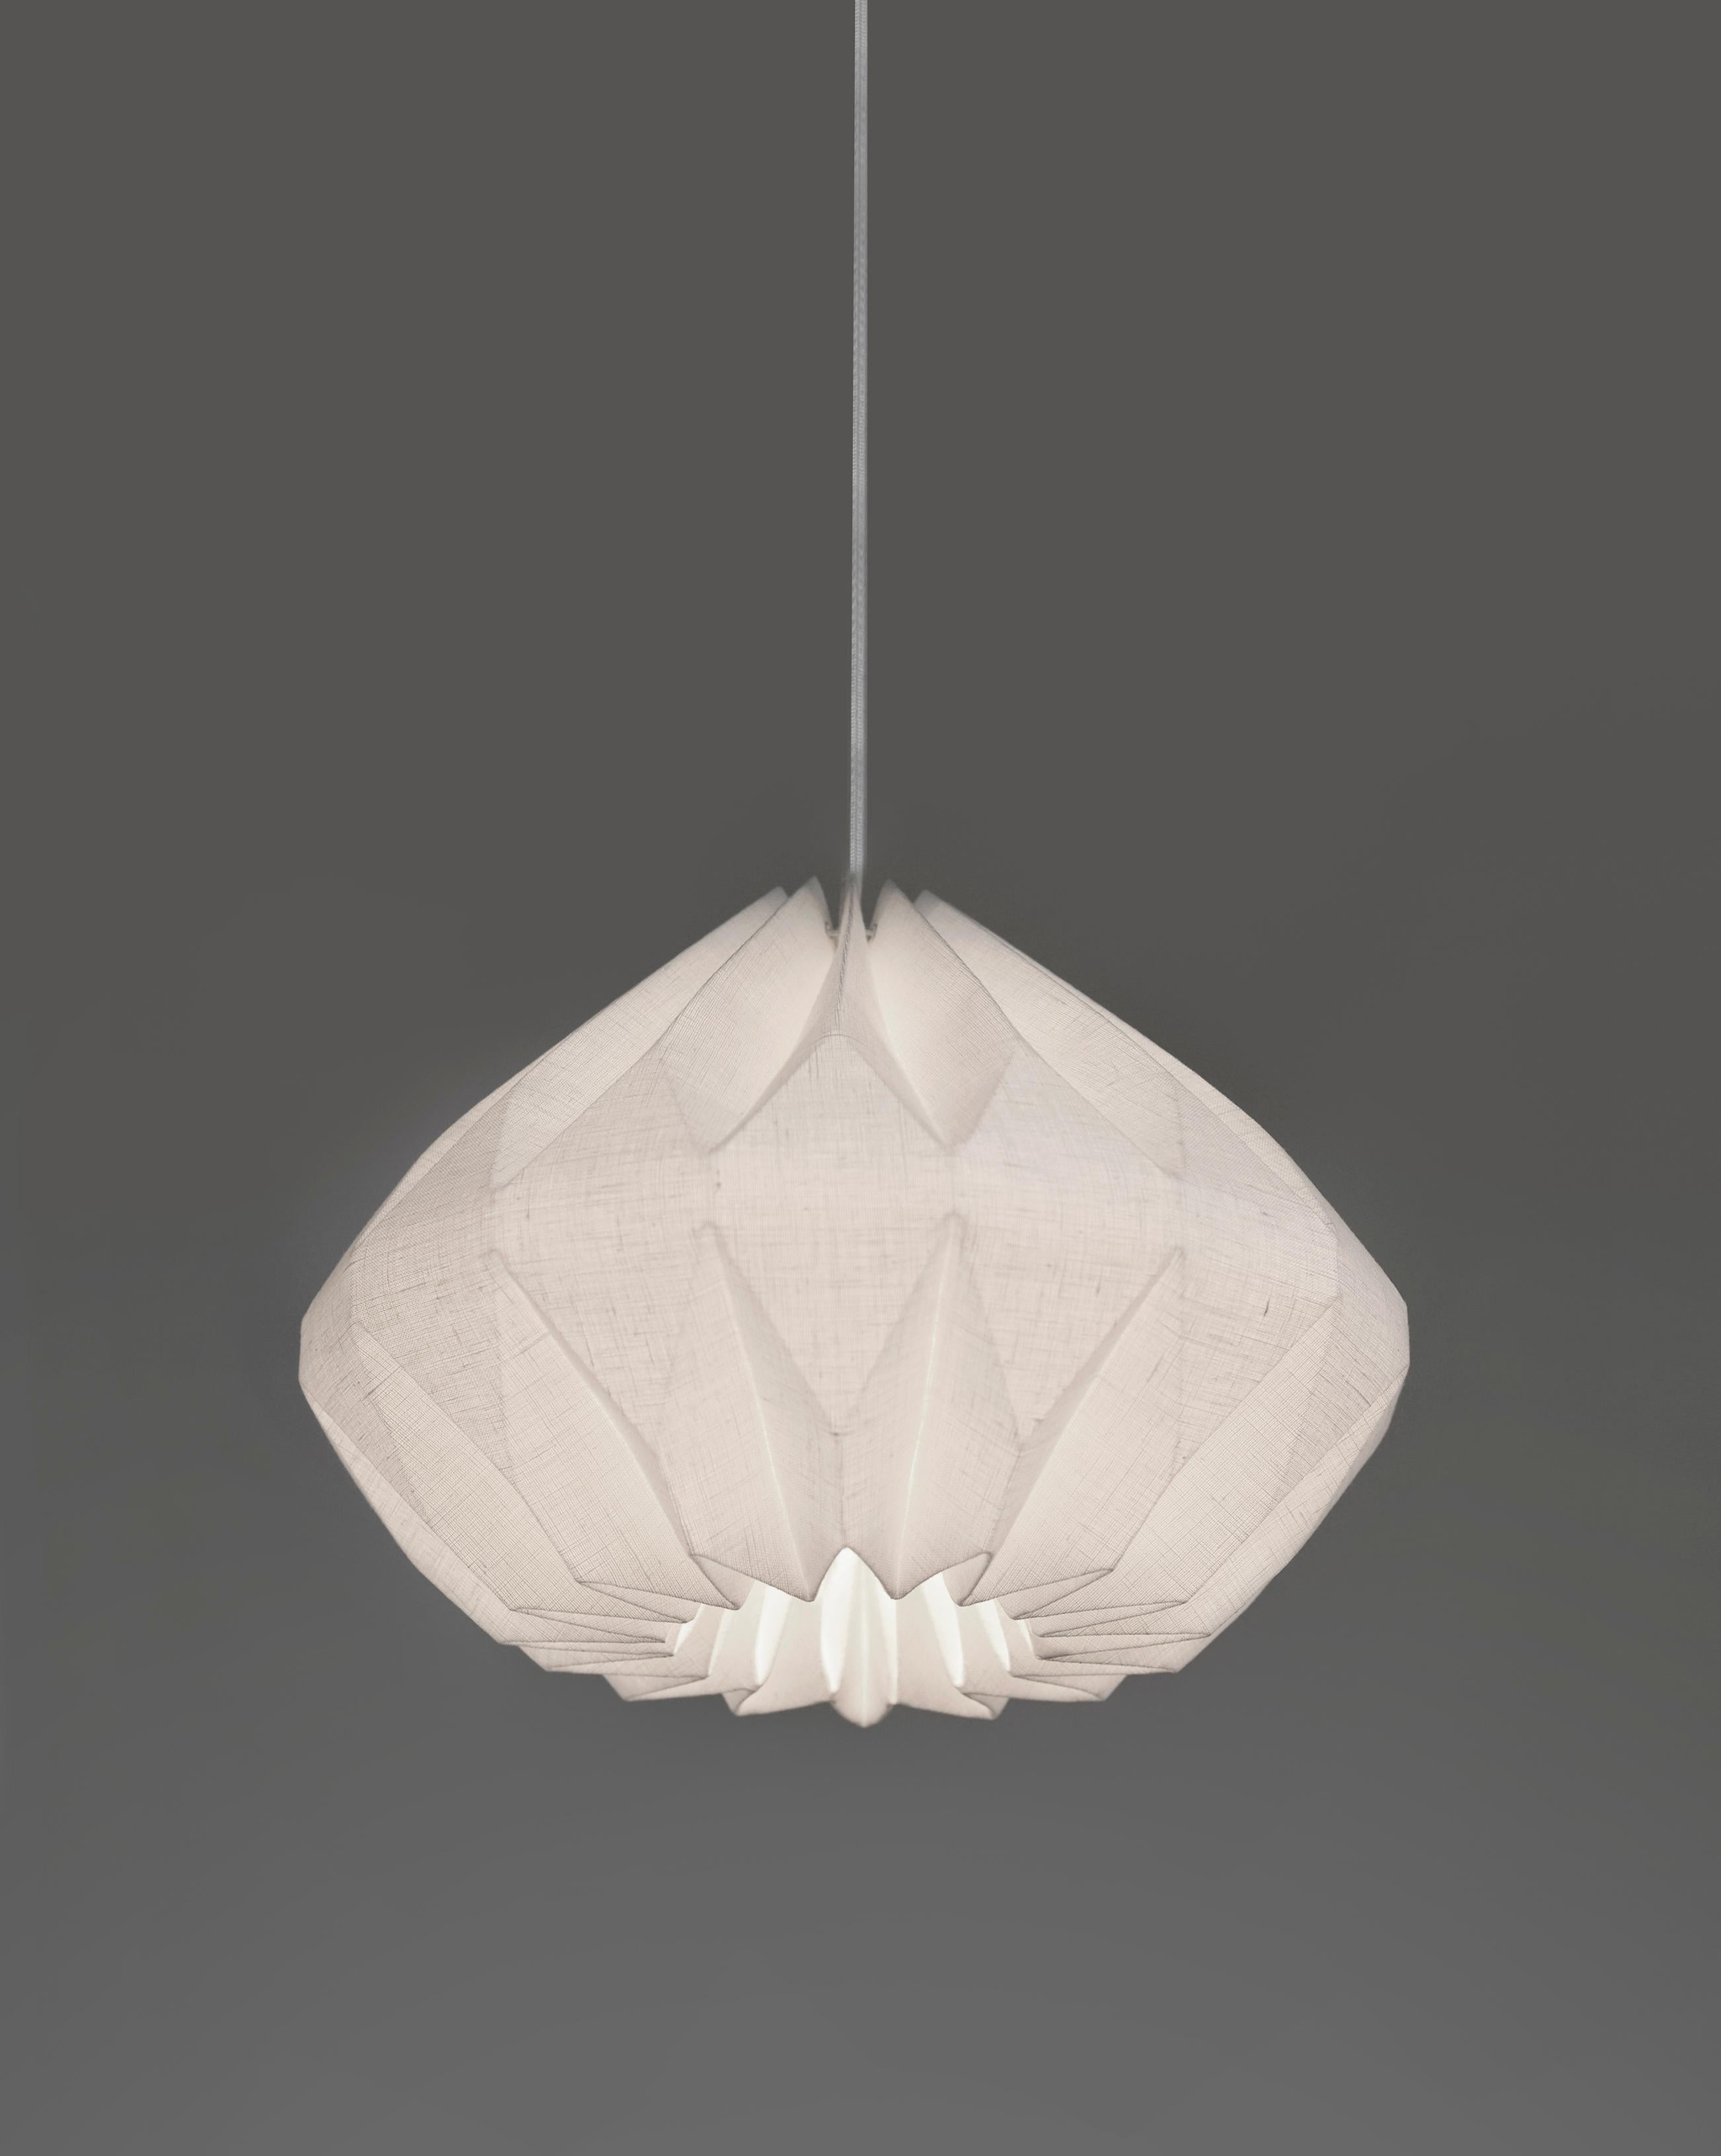 This Mid-Century Modern-style pendant light will add an interesting and functional work of art to your interior. Made of laminated linen fabric,  this hand-folded pendant lamp diffuses the light providing soft ambient lighting capable of